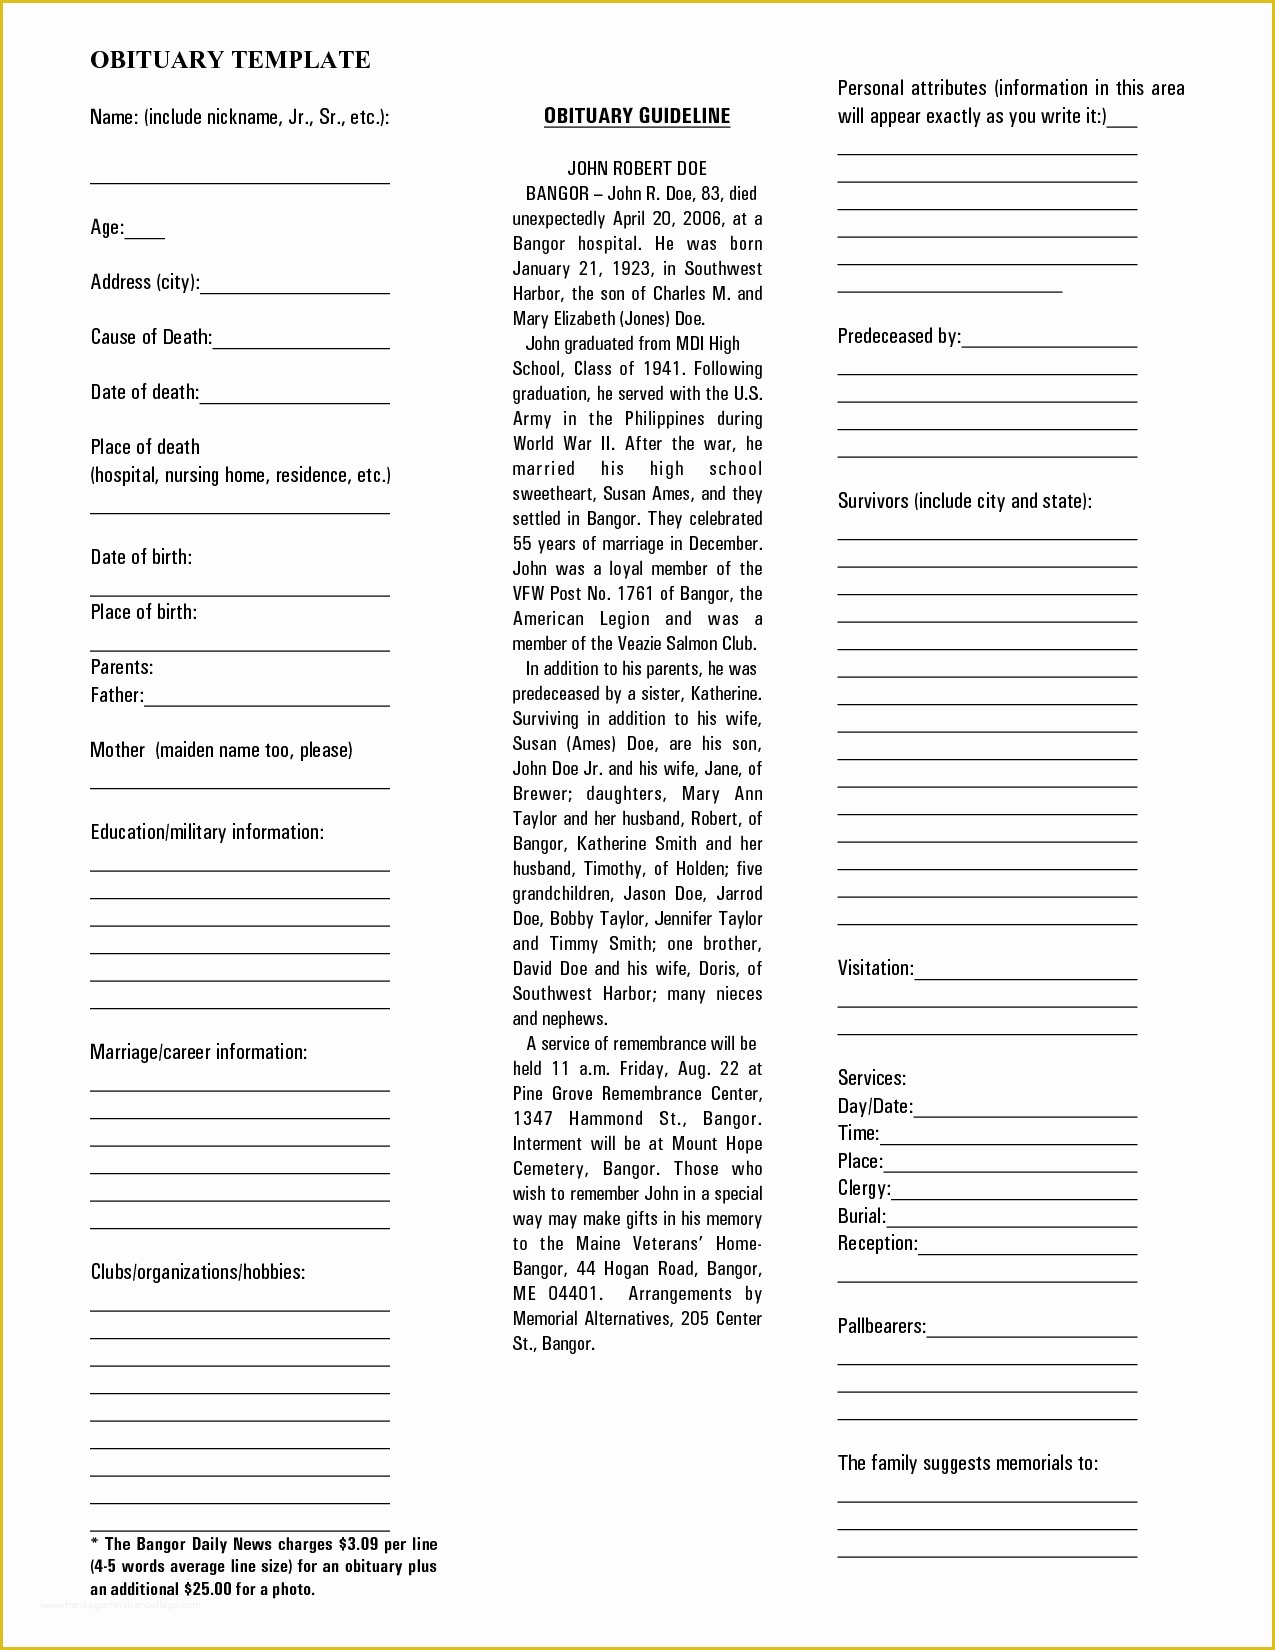 Free Obituary Template Download Of 4 Best Of Free Printable Obituary Templates